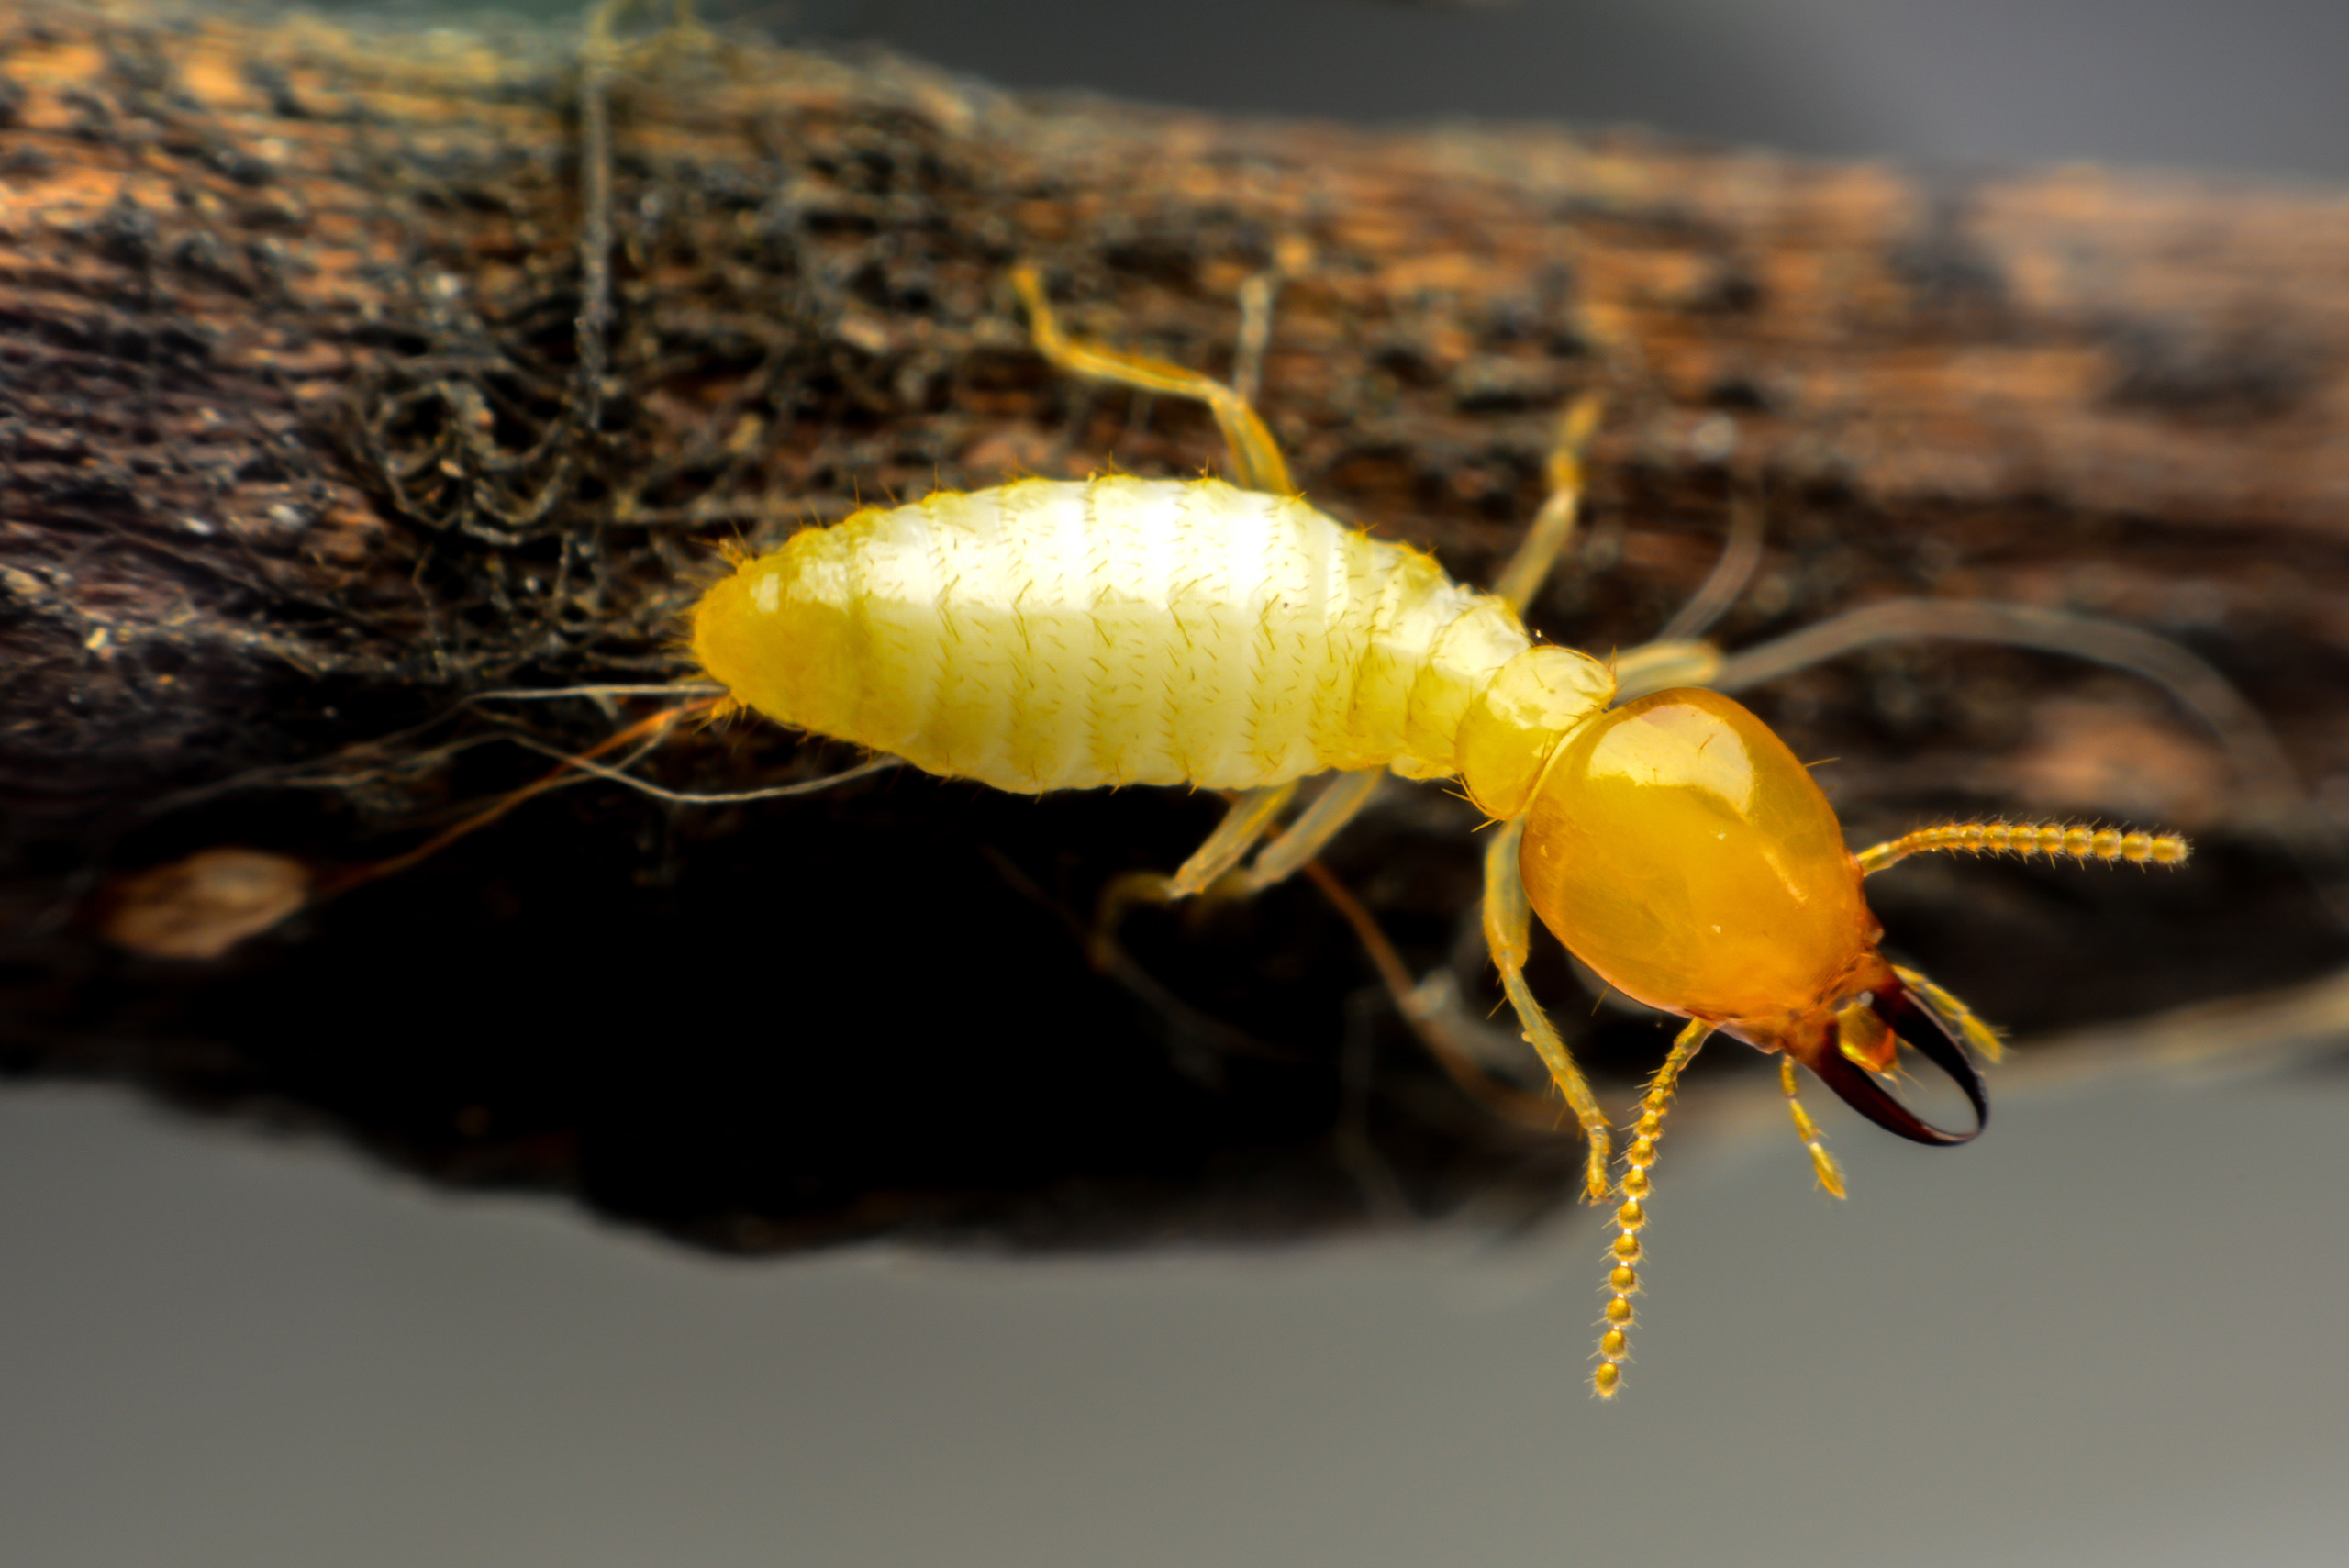 Termites vs Flying Ants in your area